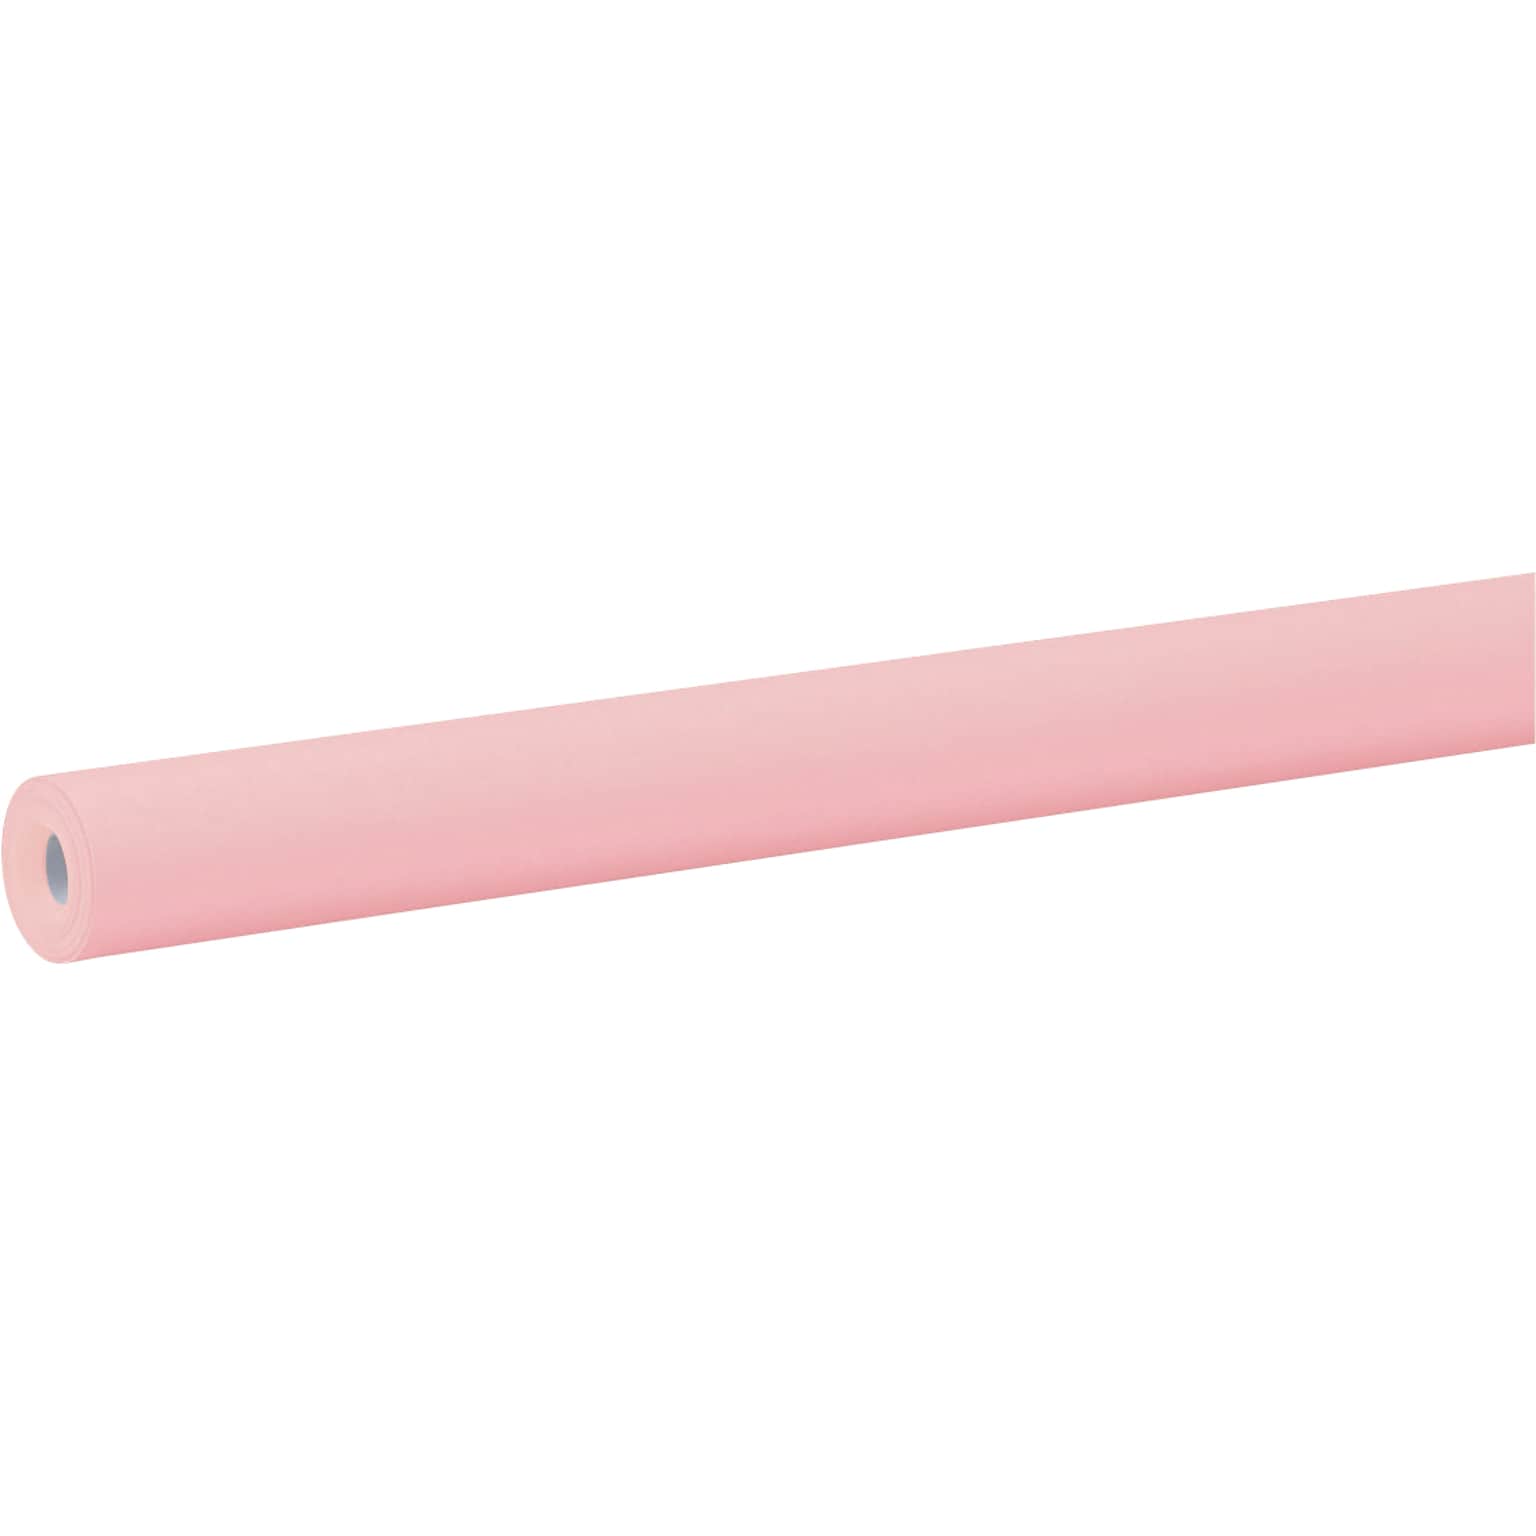 Fadeless Paper Roll, 48 x 50, Pink (P0057265)